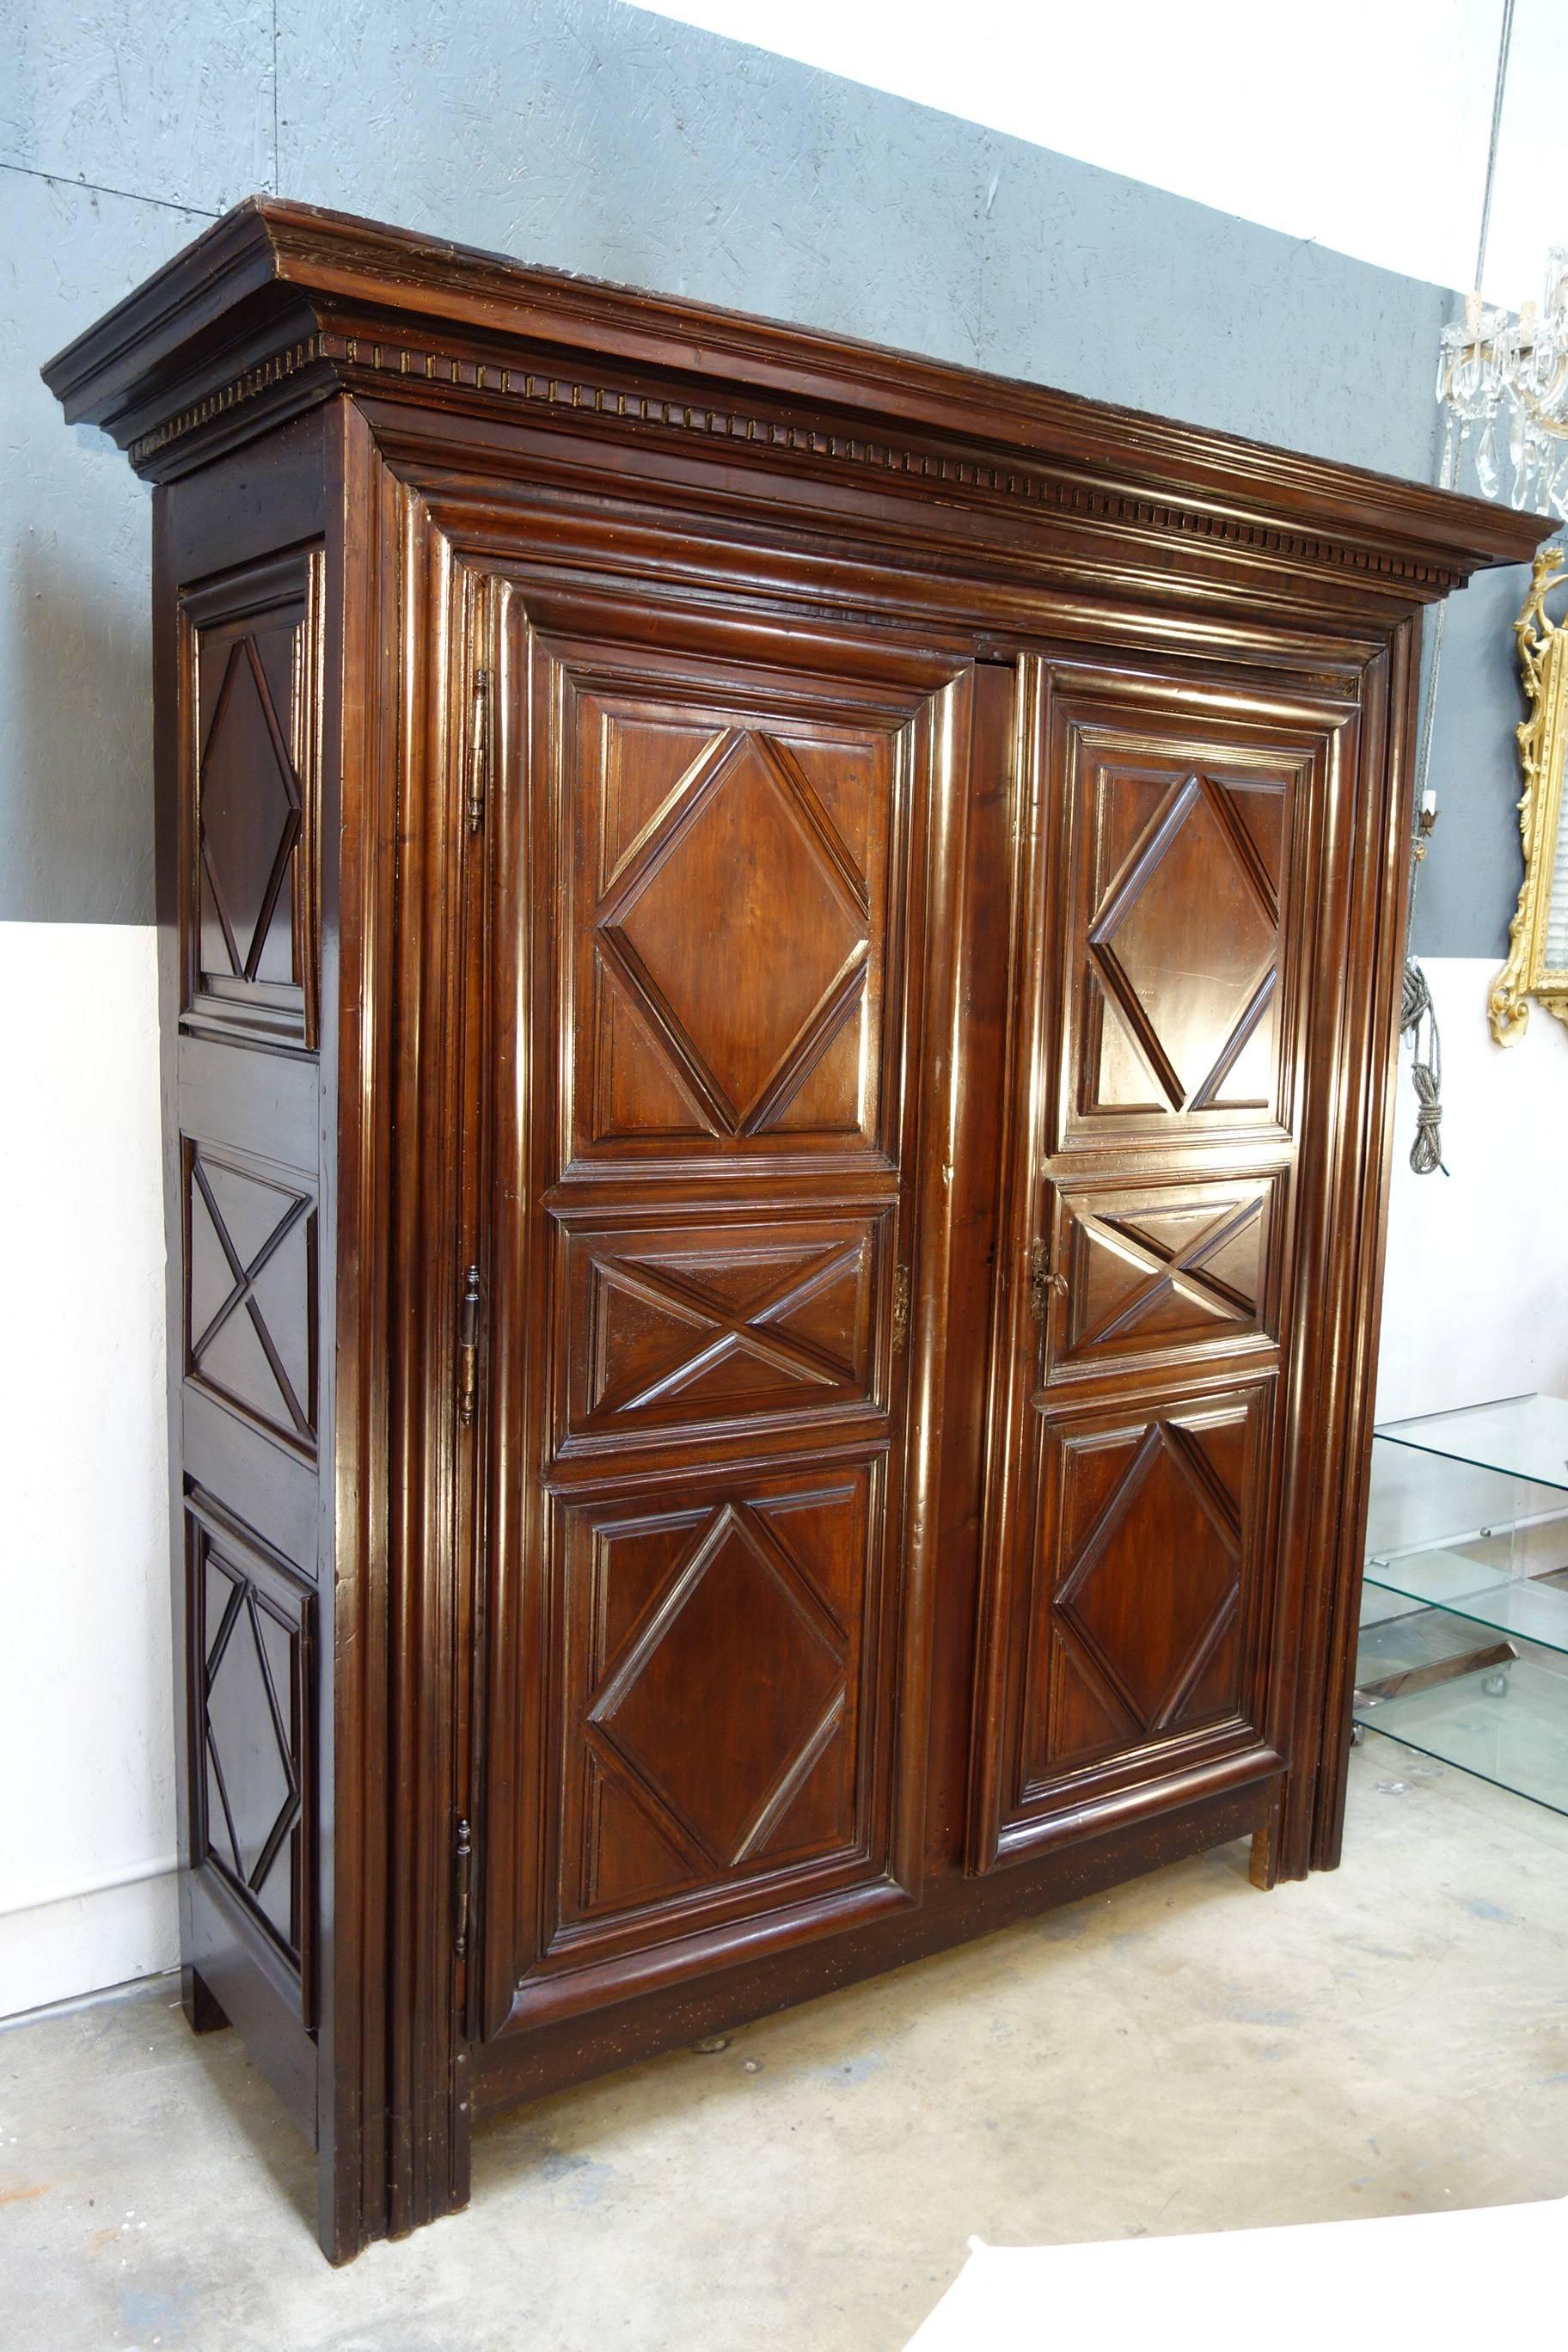 Late 17th century Louis XIII walnut armoire, all solid walnut paneled sides and doors. Originally was a two-door armoire with a center jamb then in a later time was modified in order to be able to open completely. Original key and lock. The frame it